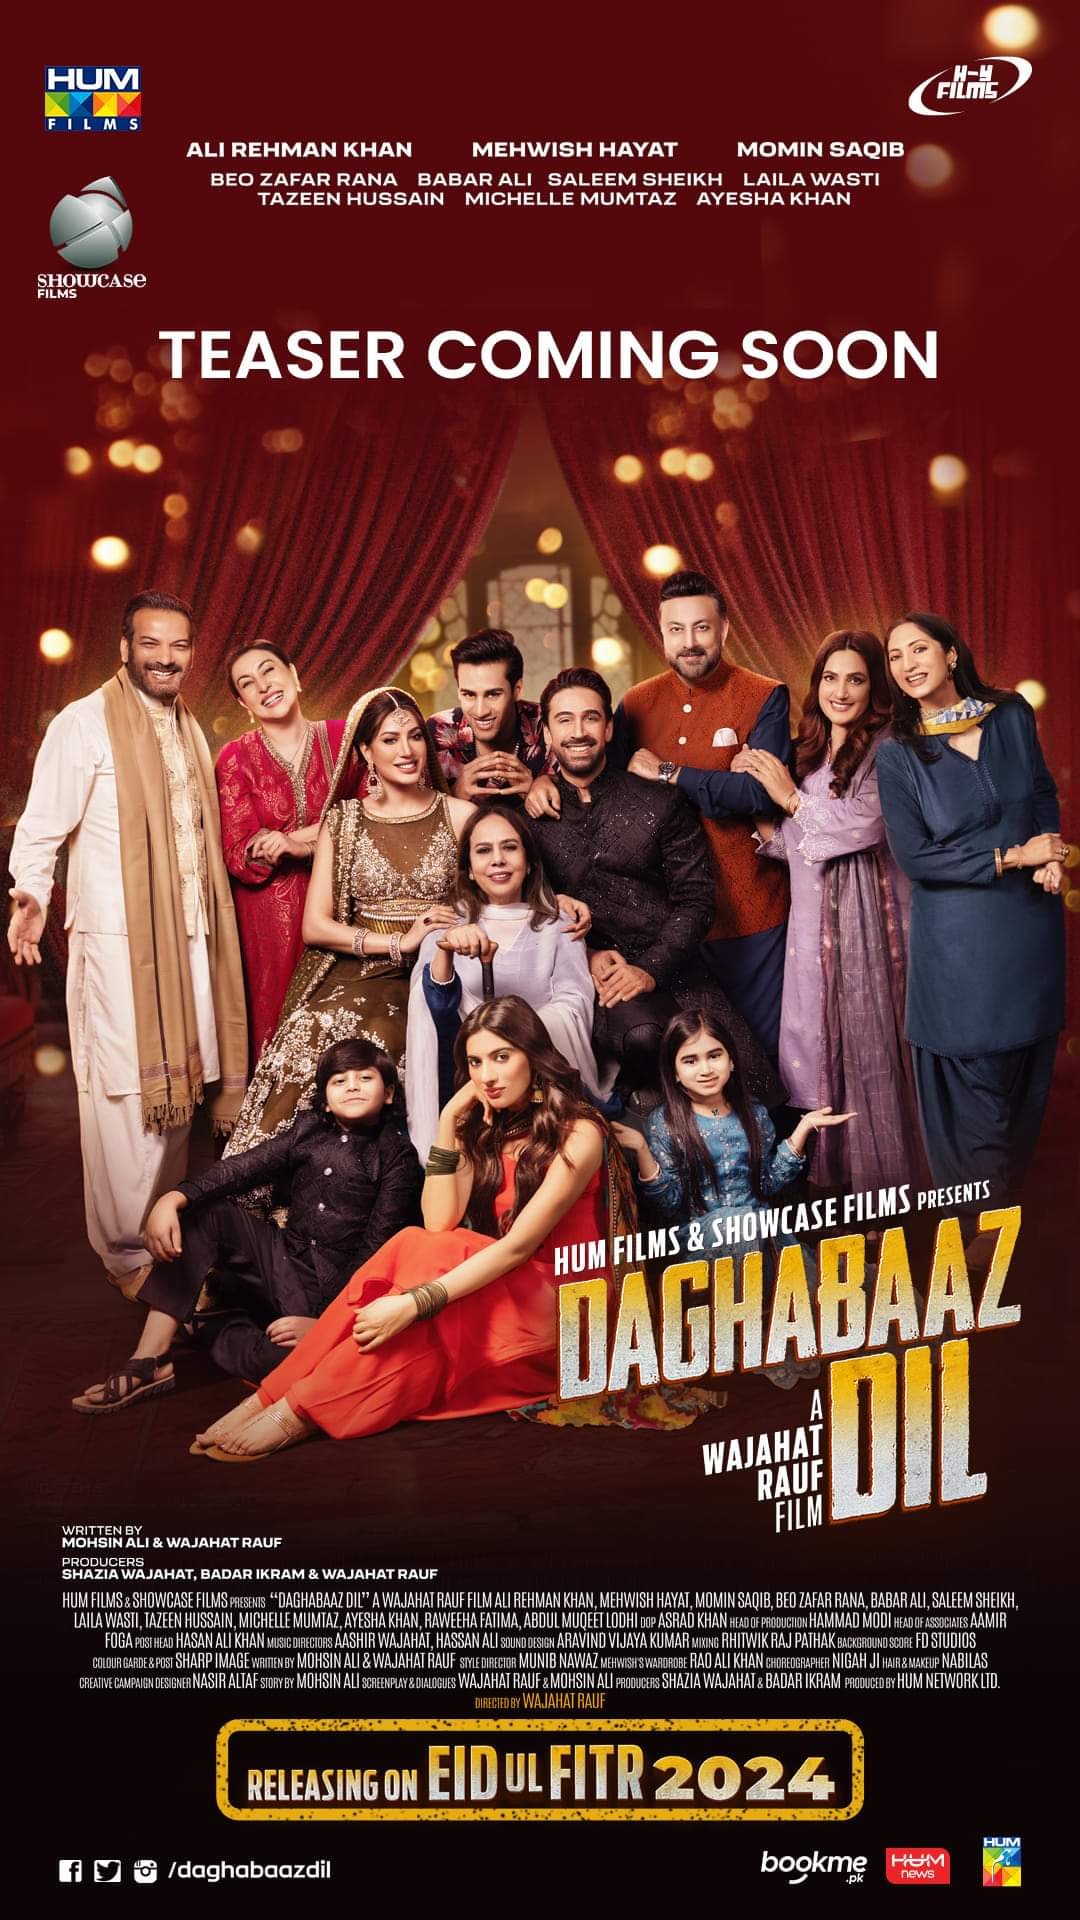 Urdu poster of the movie Daghabaaz Dil